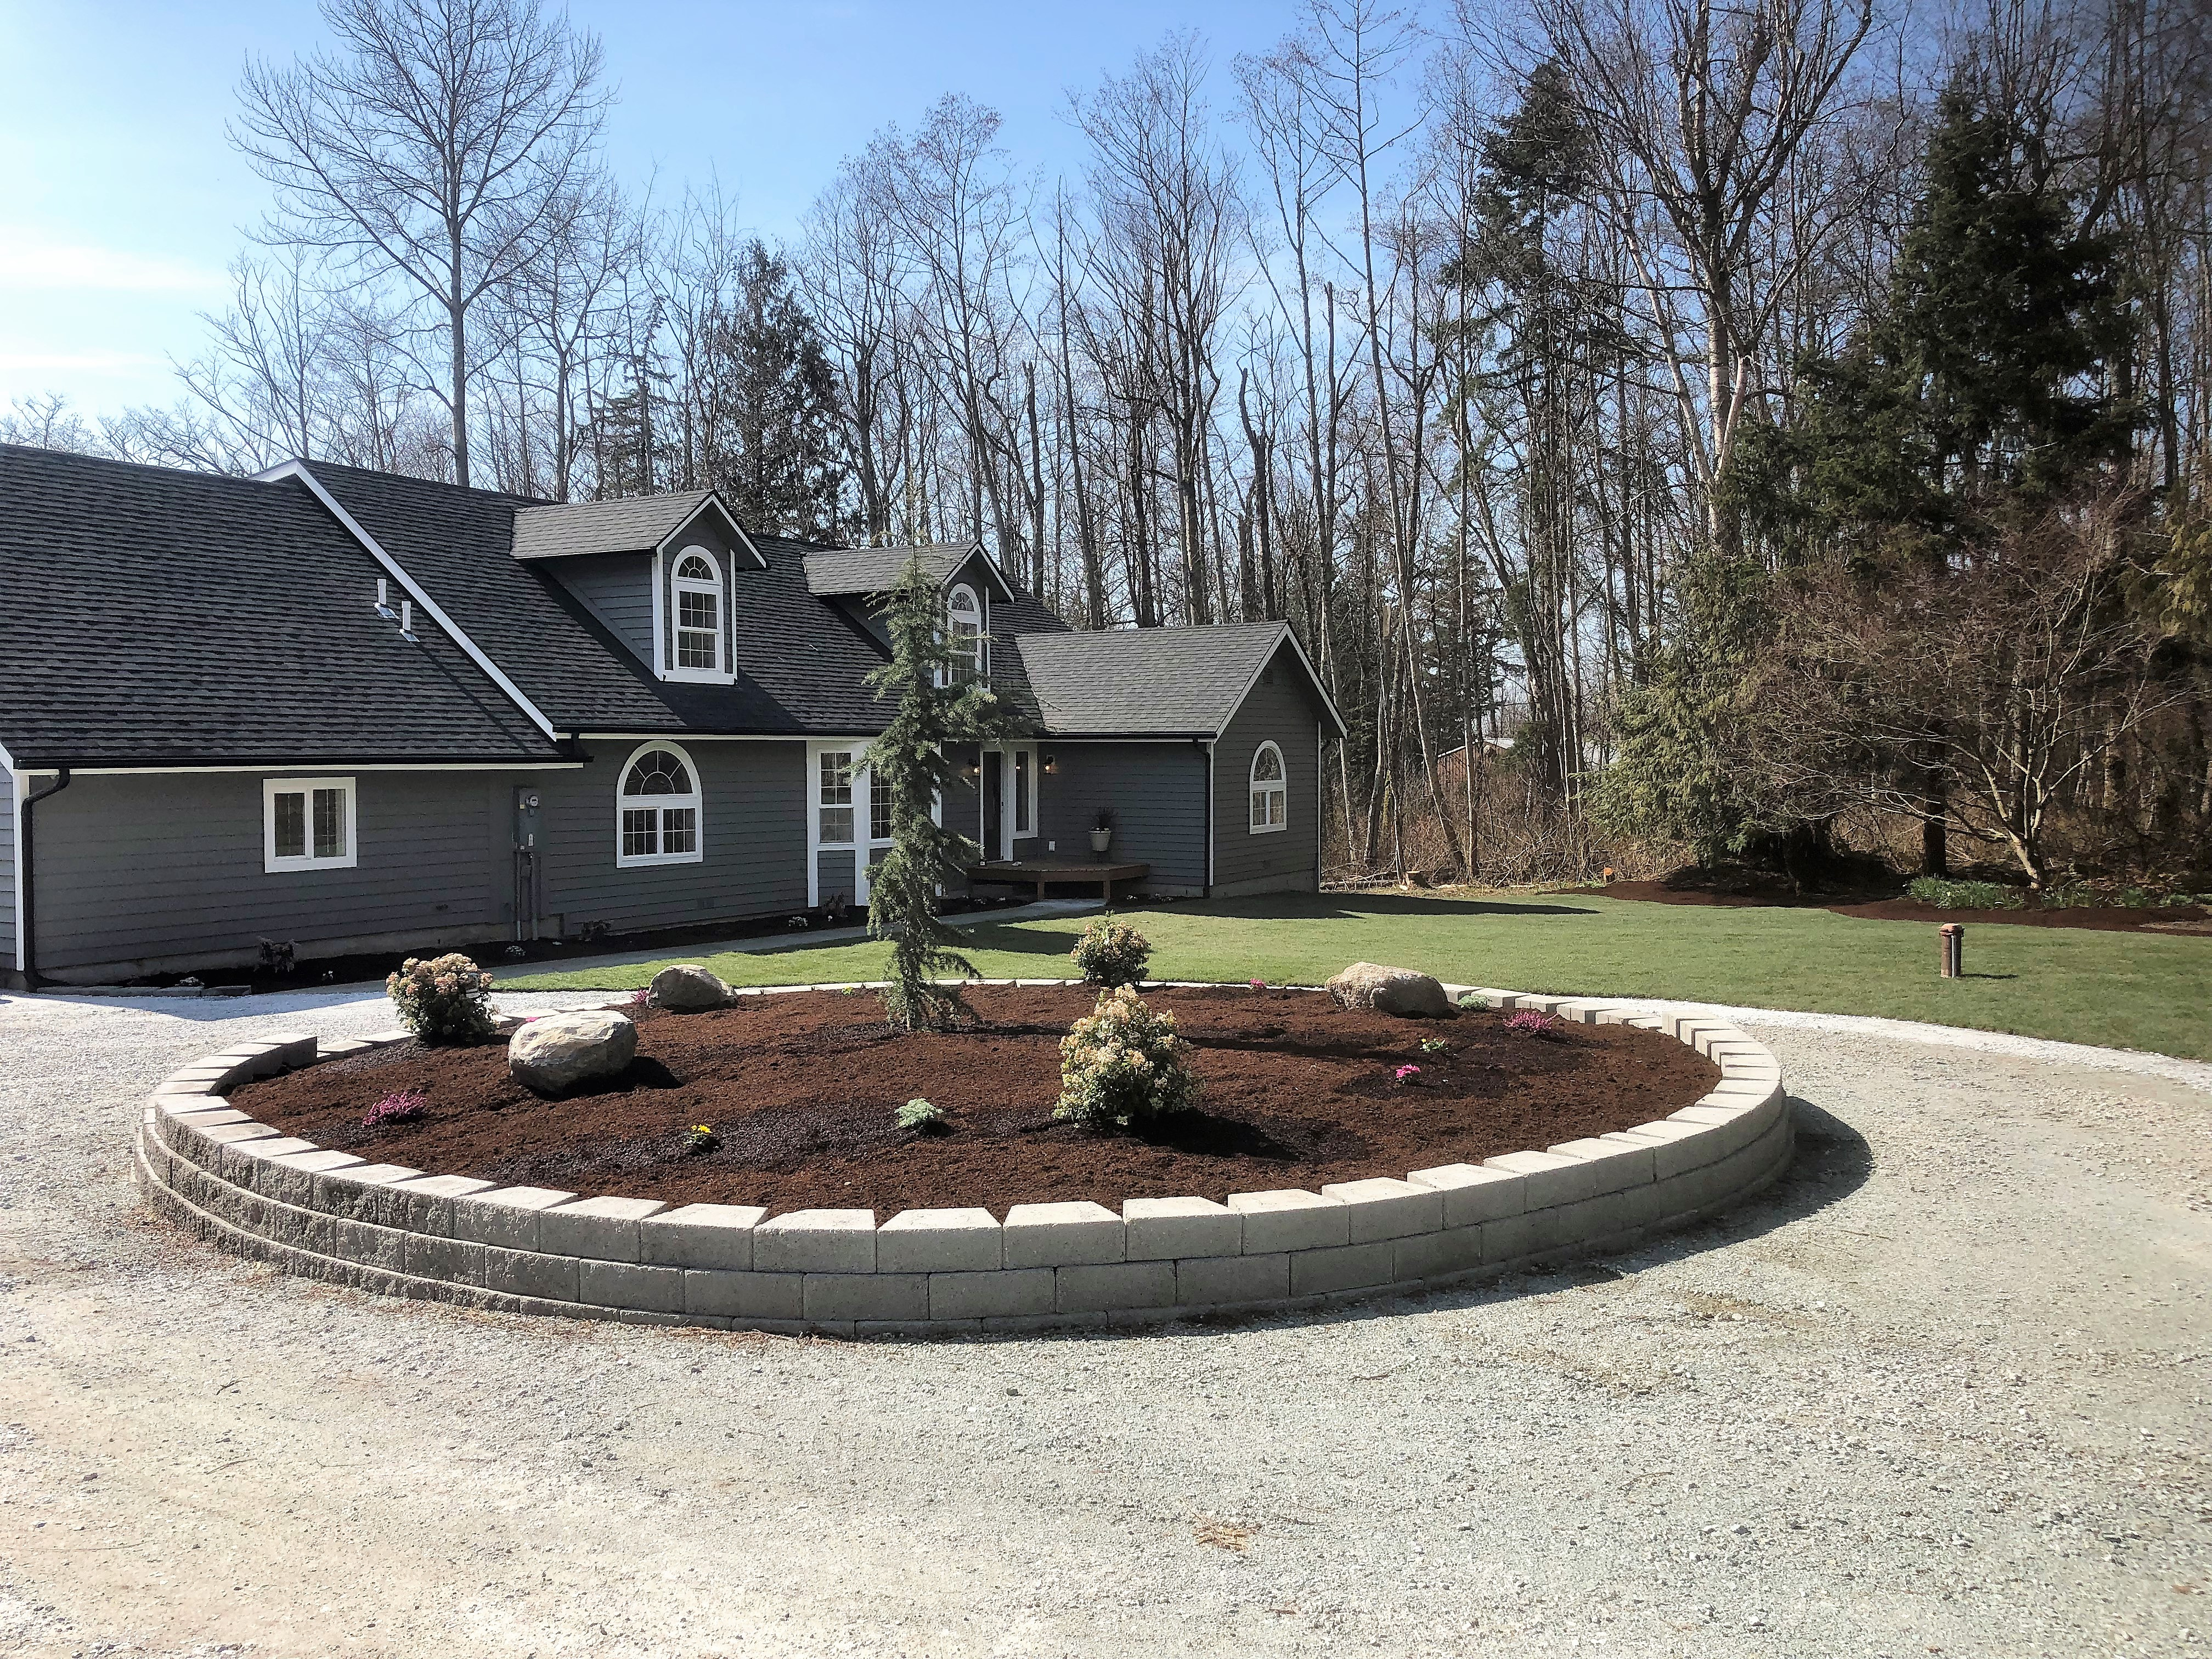 Driveway, plant-bed, and sod.